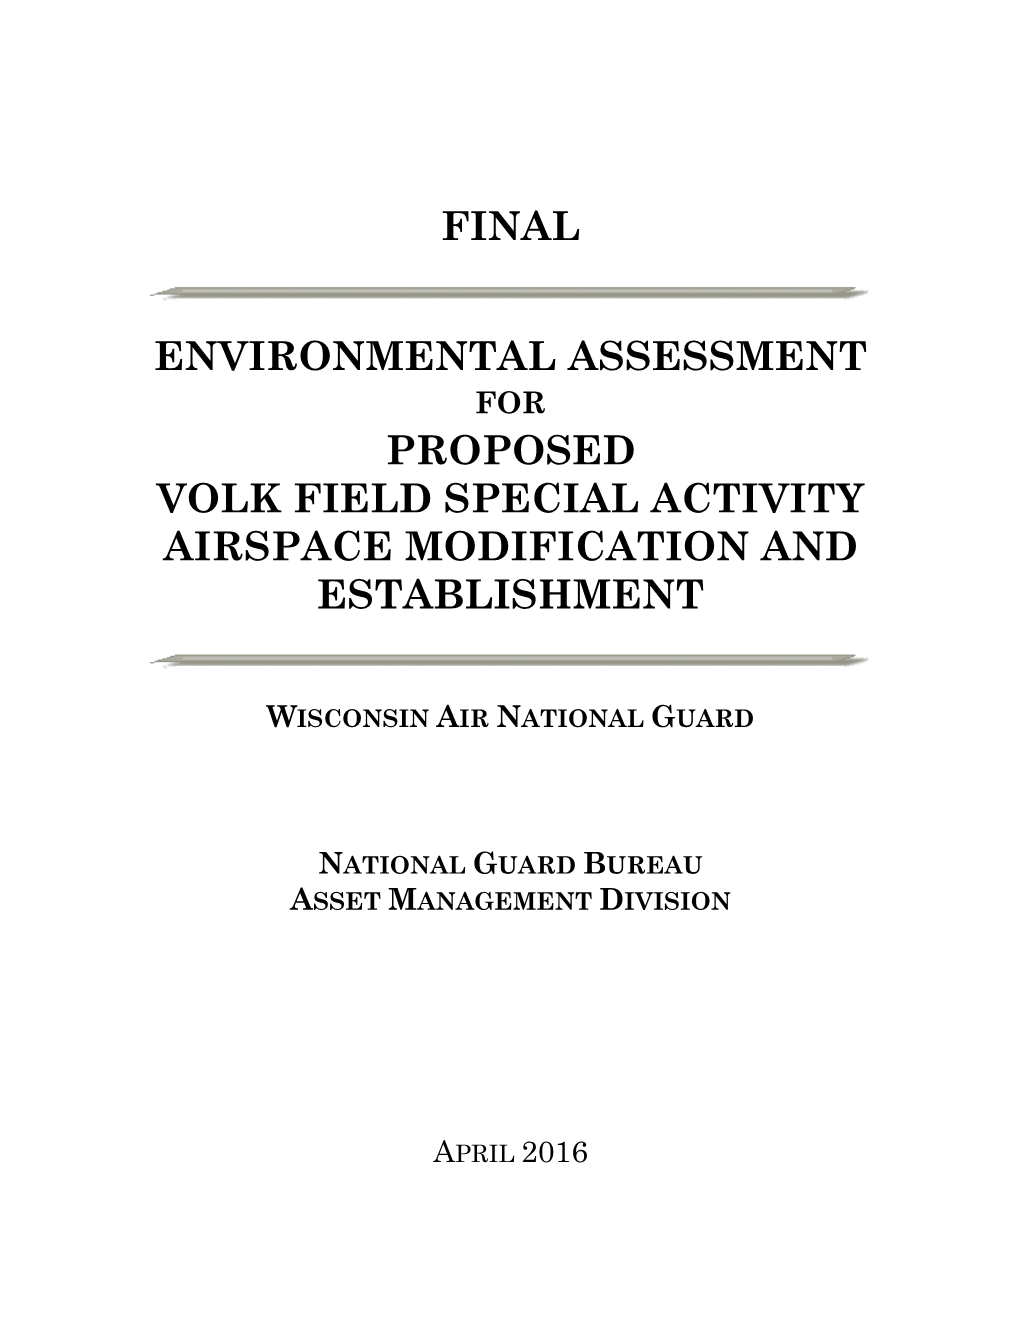 For Proposed Volk Field Special Activity Airspace Modification and Establishment